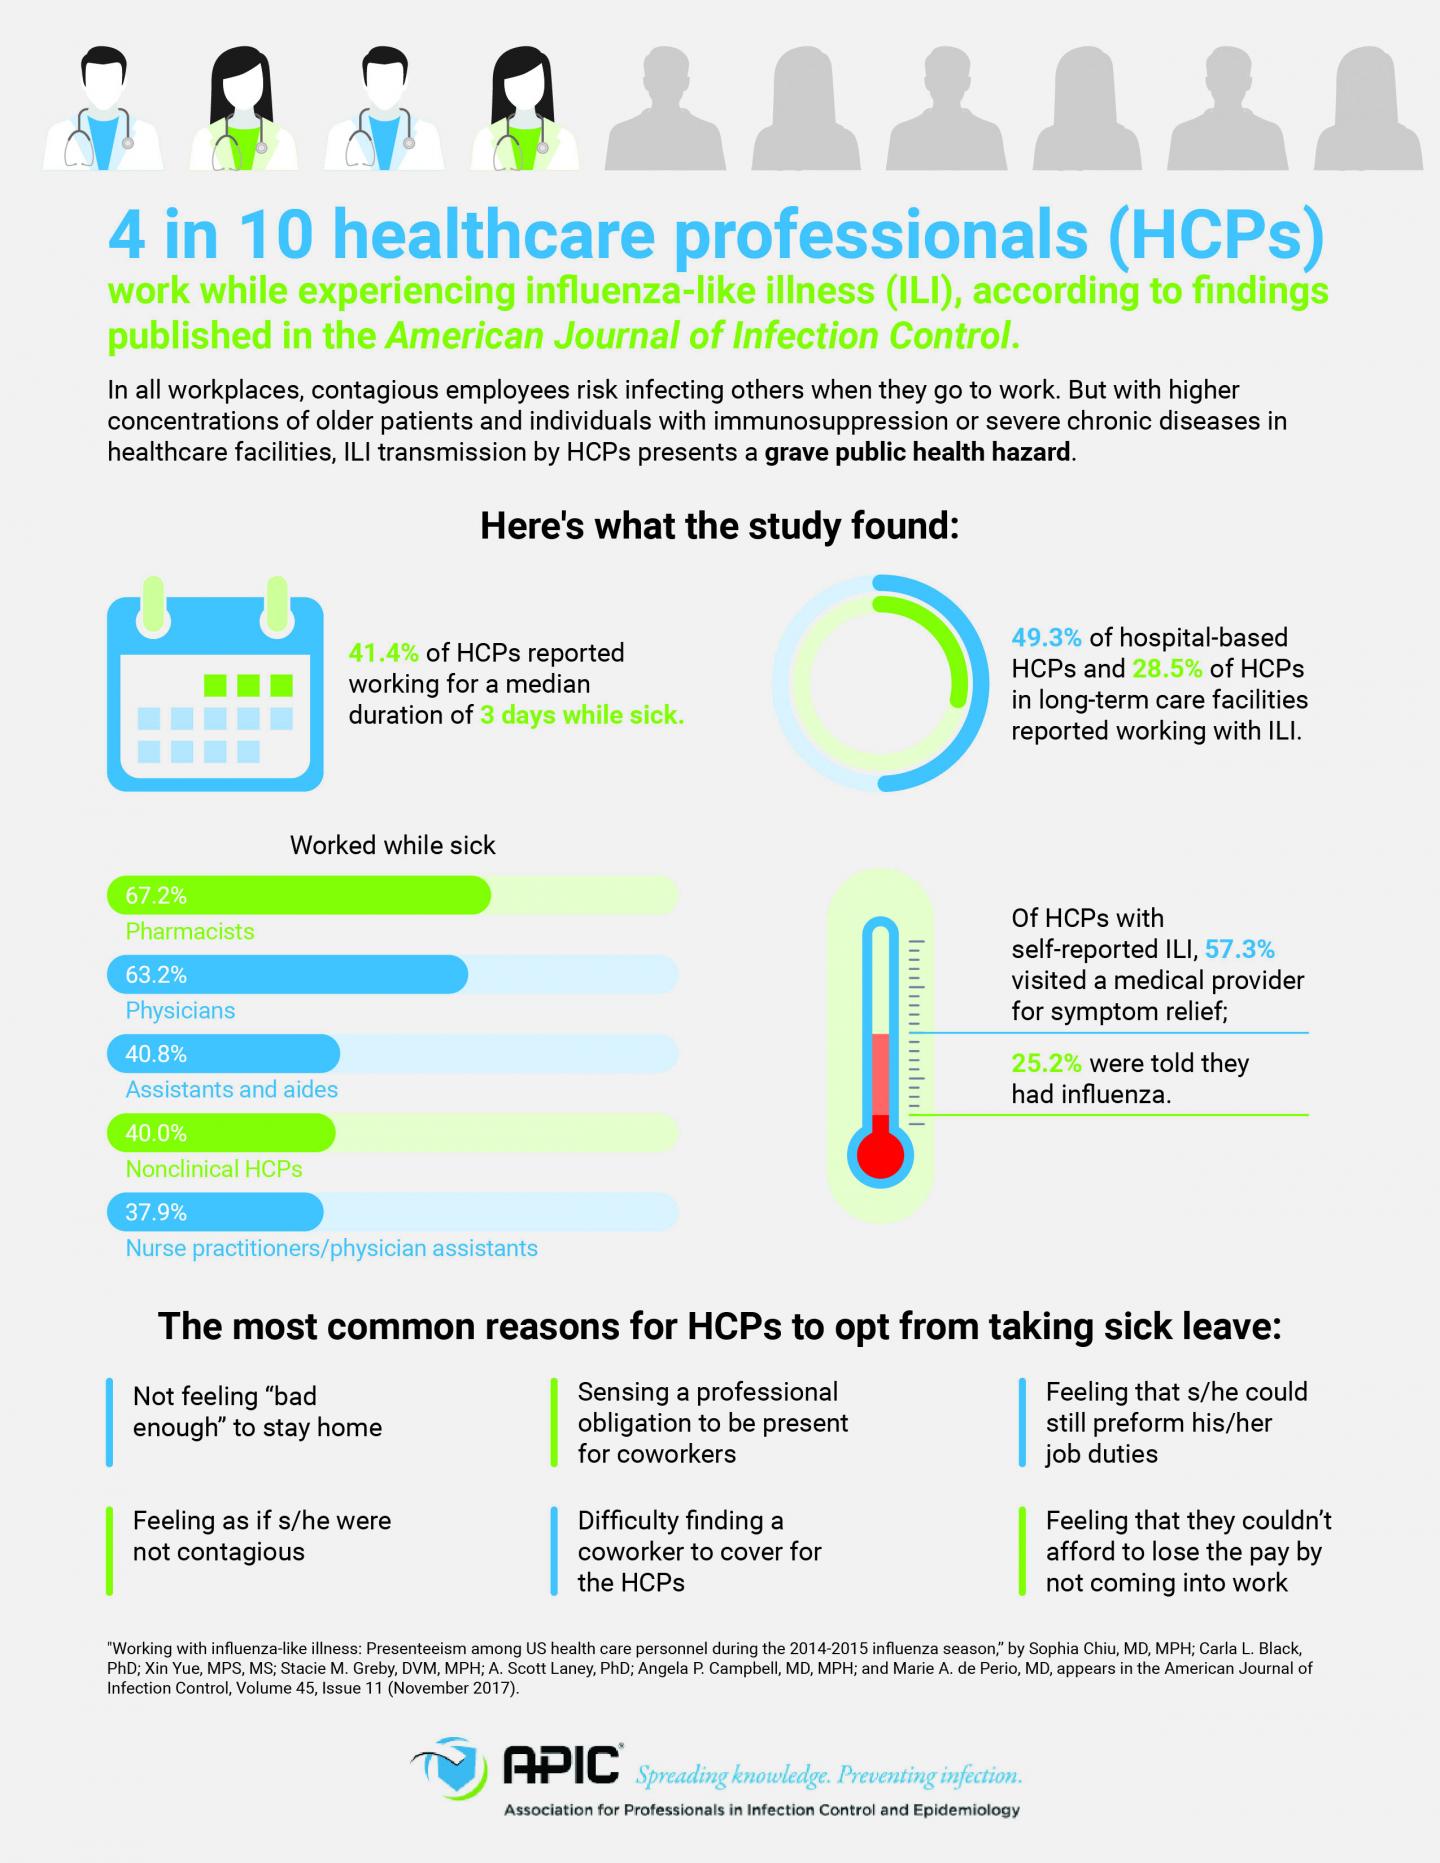 Survey Findings: 4 in 10 Healthcare Professionals Work while Sick